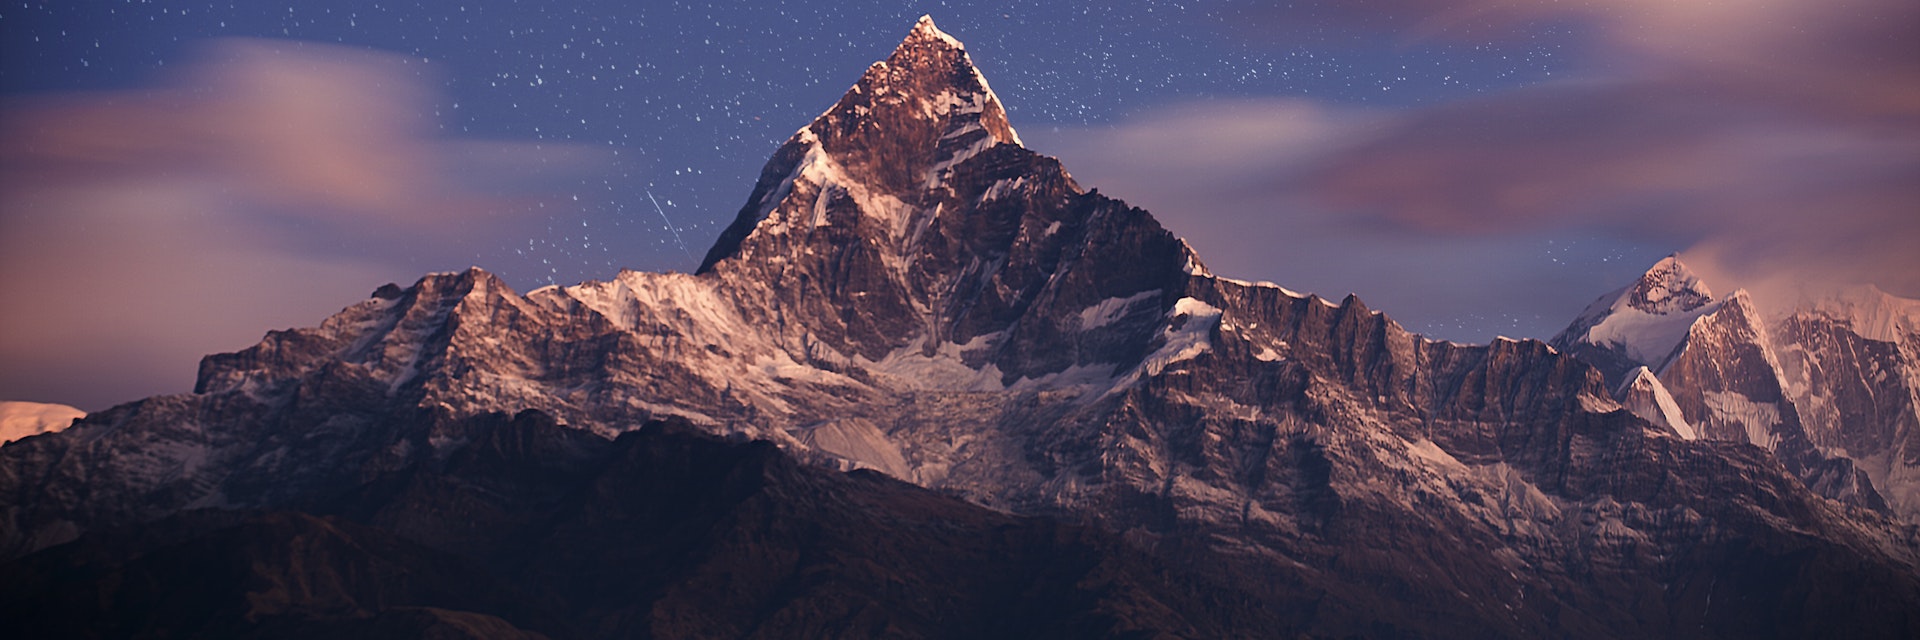 Machapuchare or Machapuchre  Lit. 'Fish Tail' in English, is a mountain in the Annapurna Himal of north central Nepal.